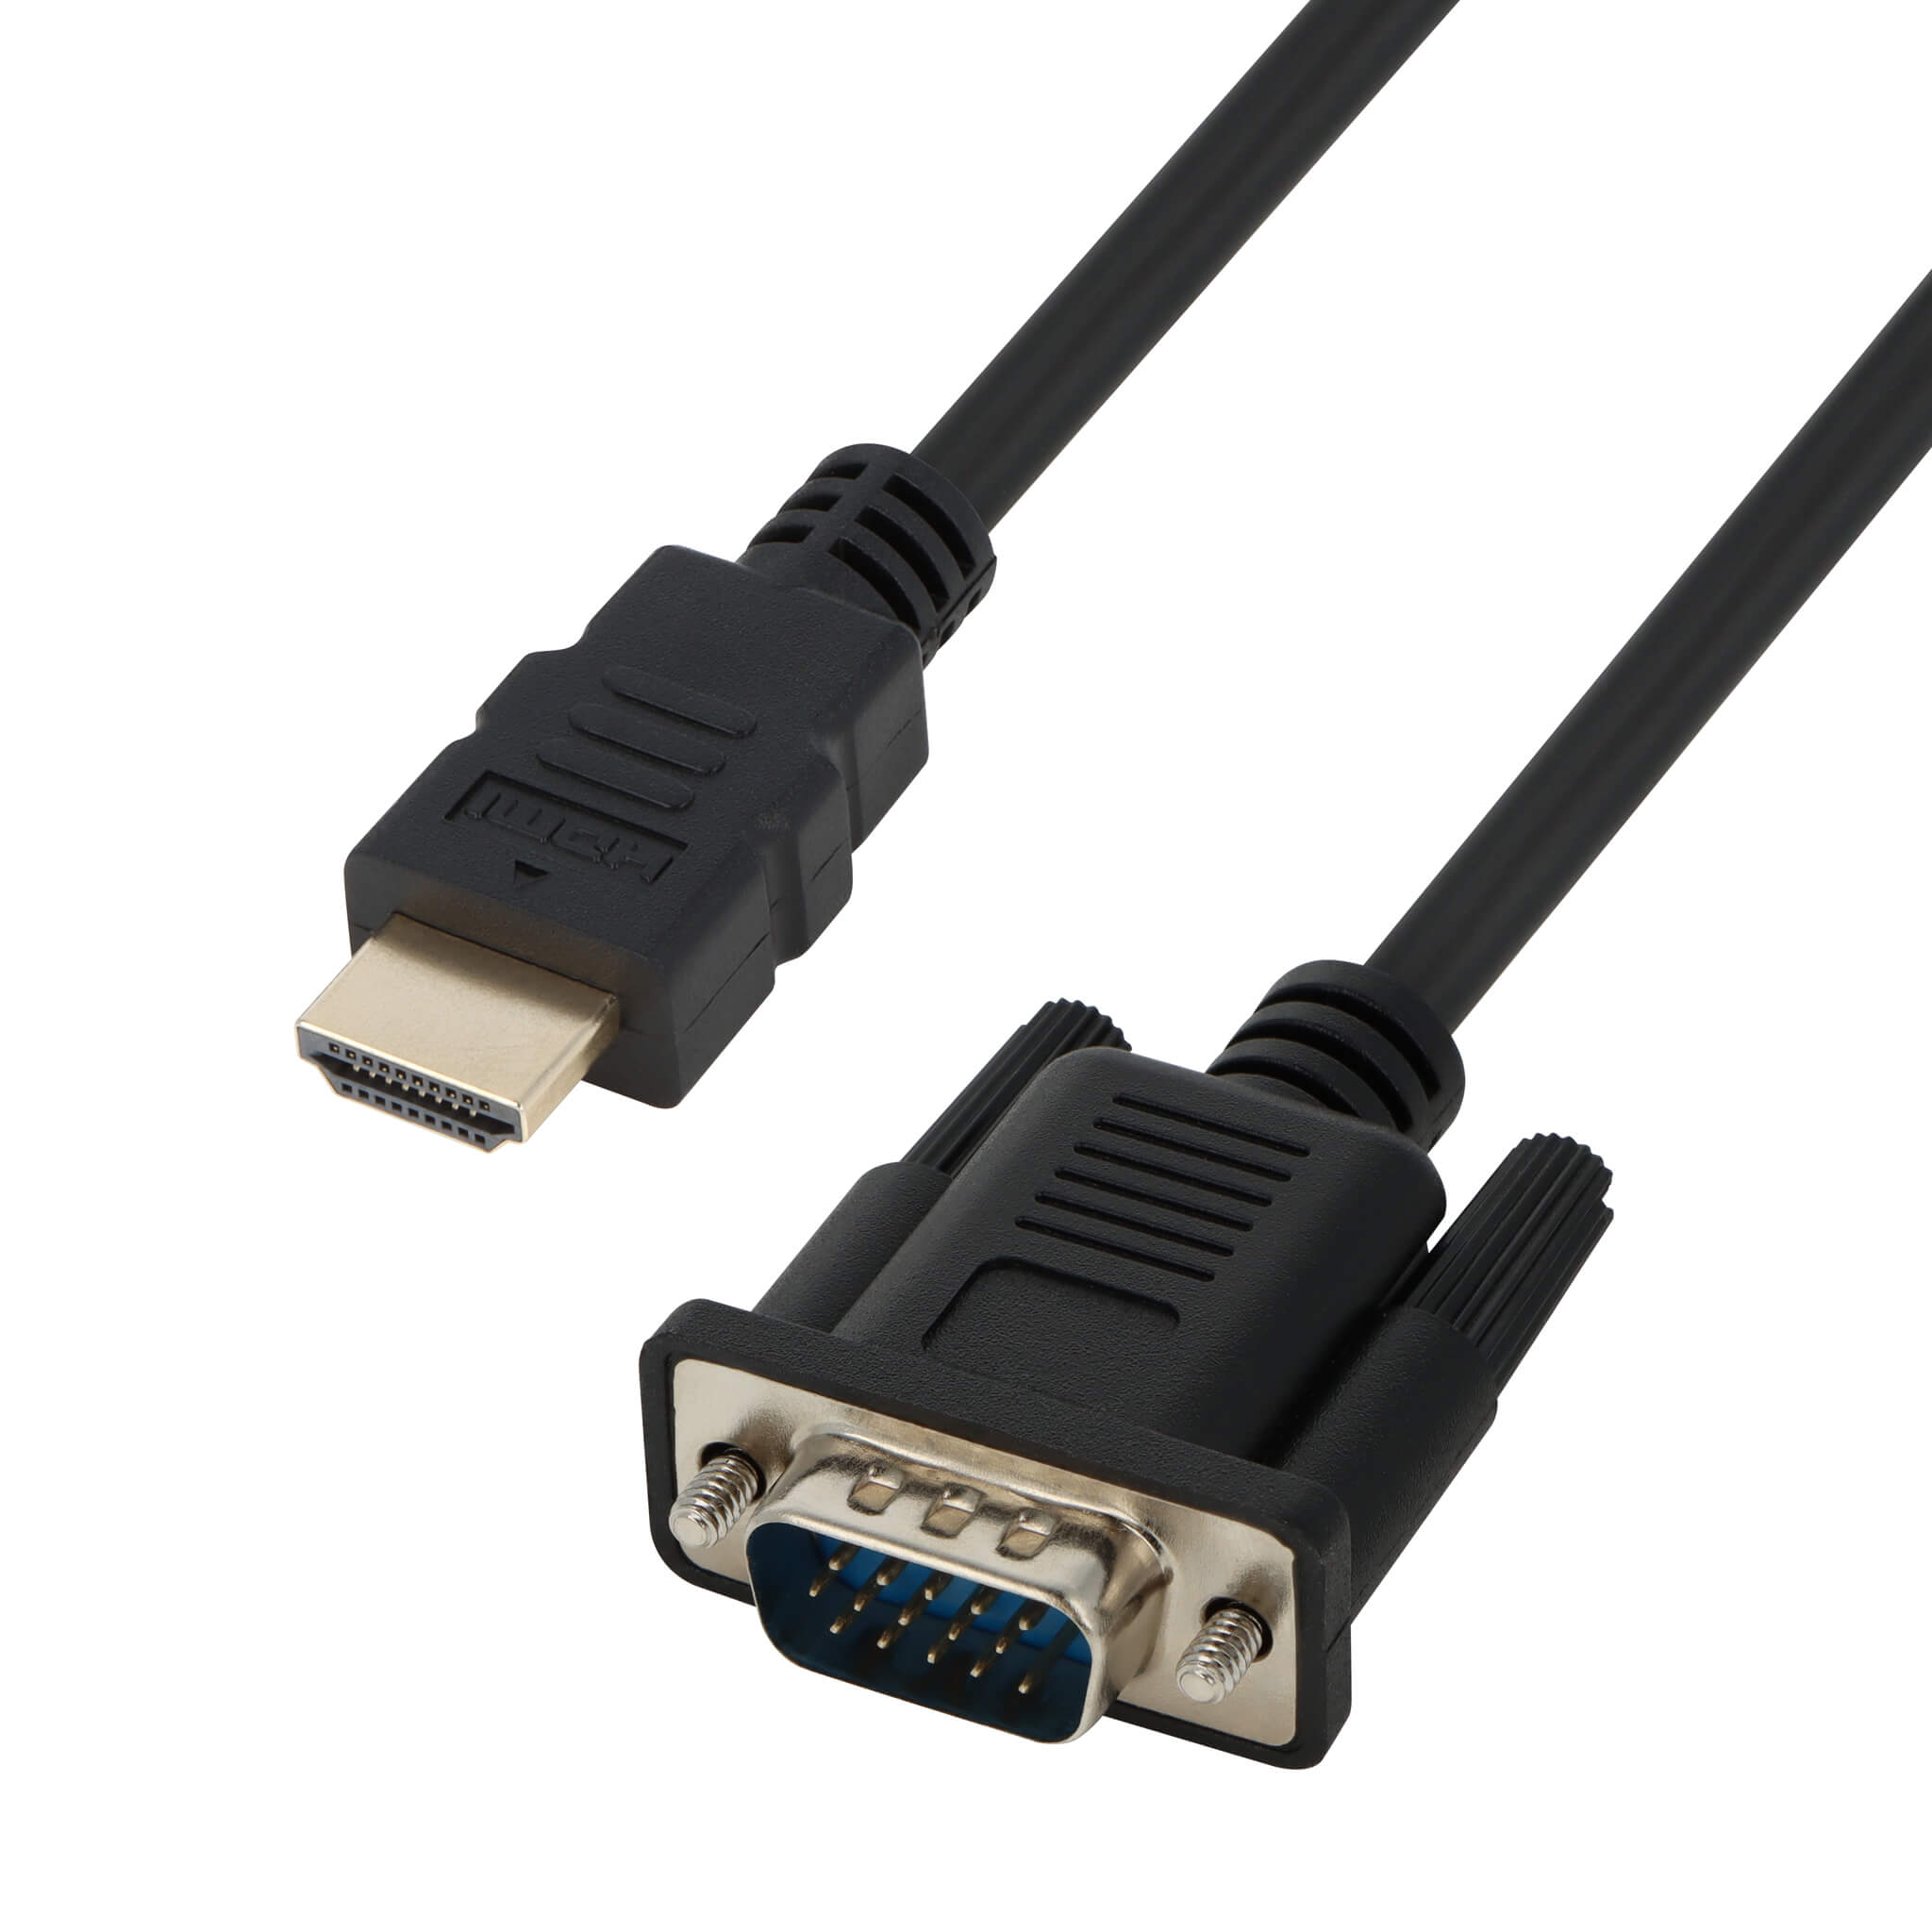 How to Convert VGA to HDMI or DVI to HDMI